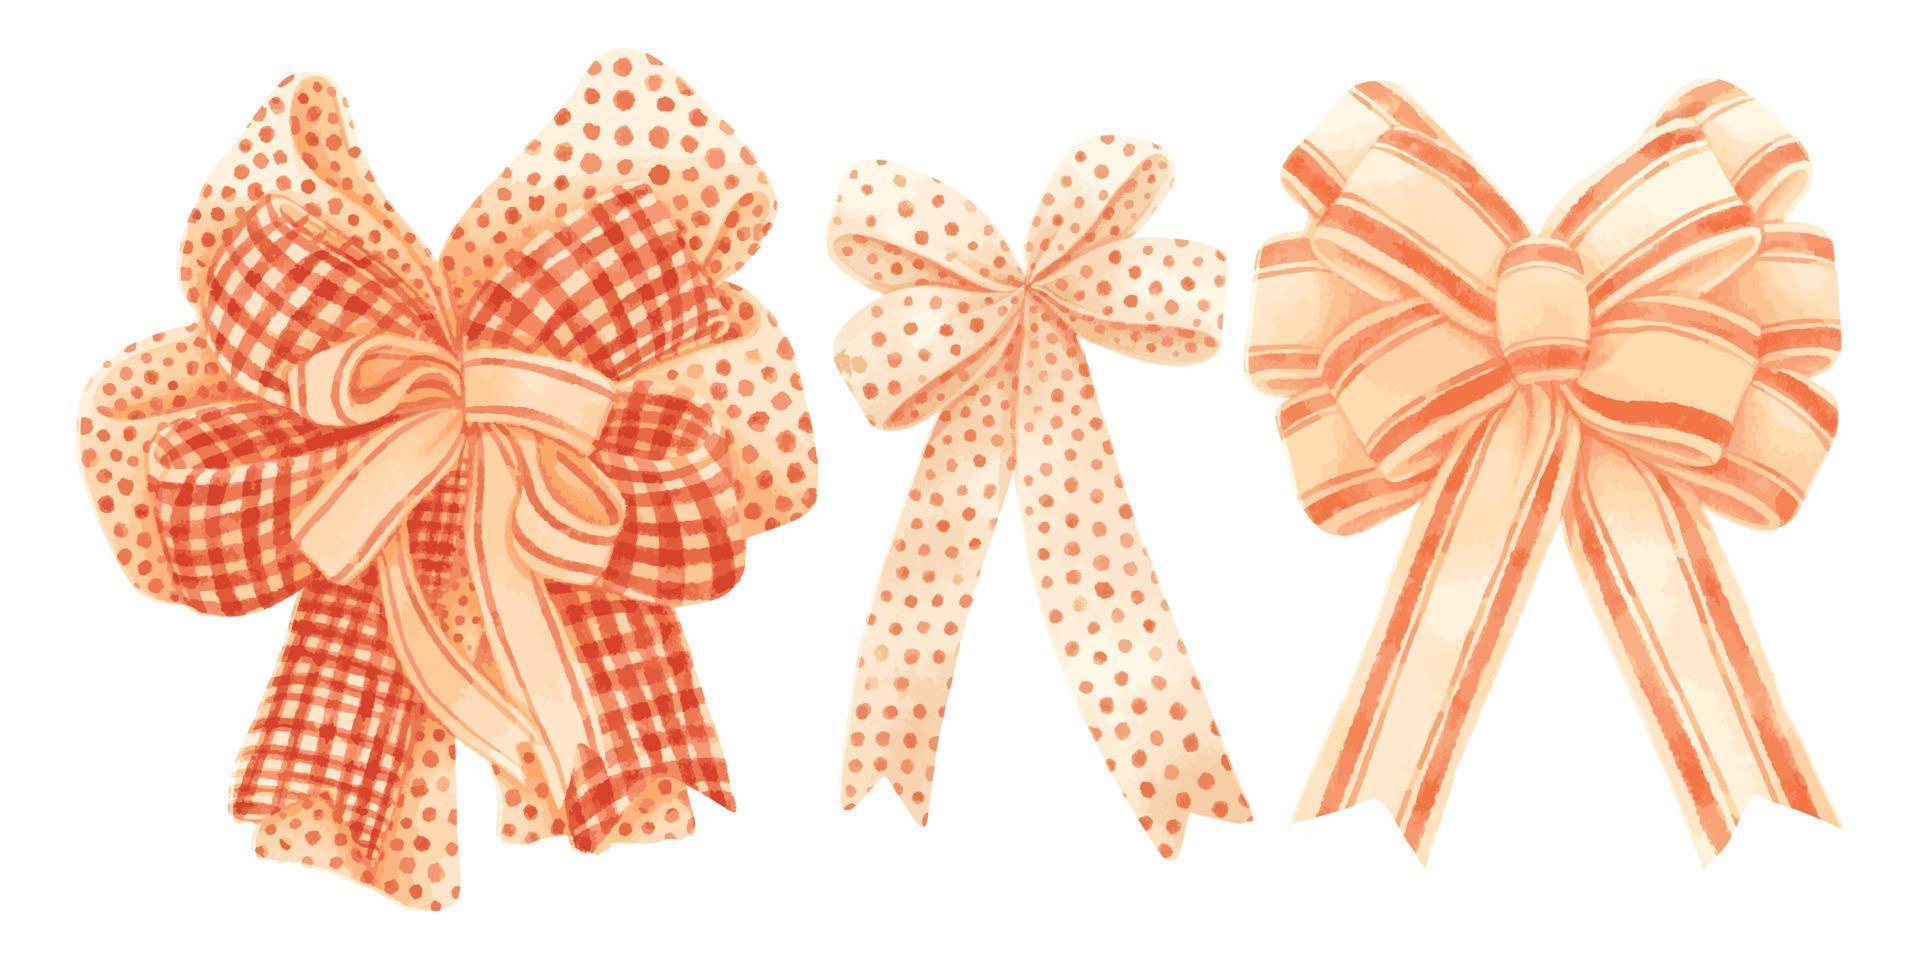 Set of gift ribbons bow illustrations hand painted watercolor styles vector